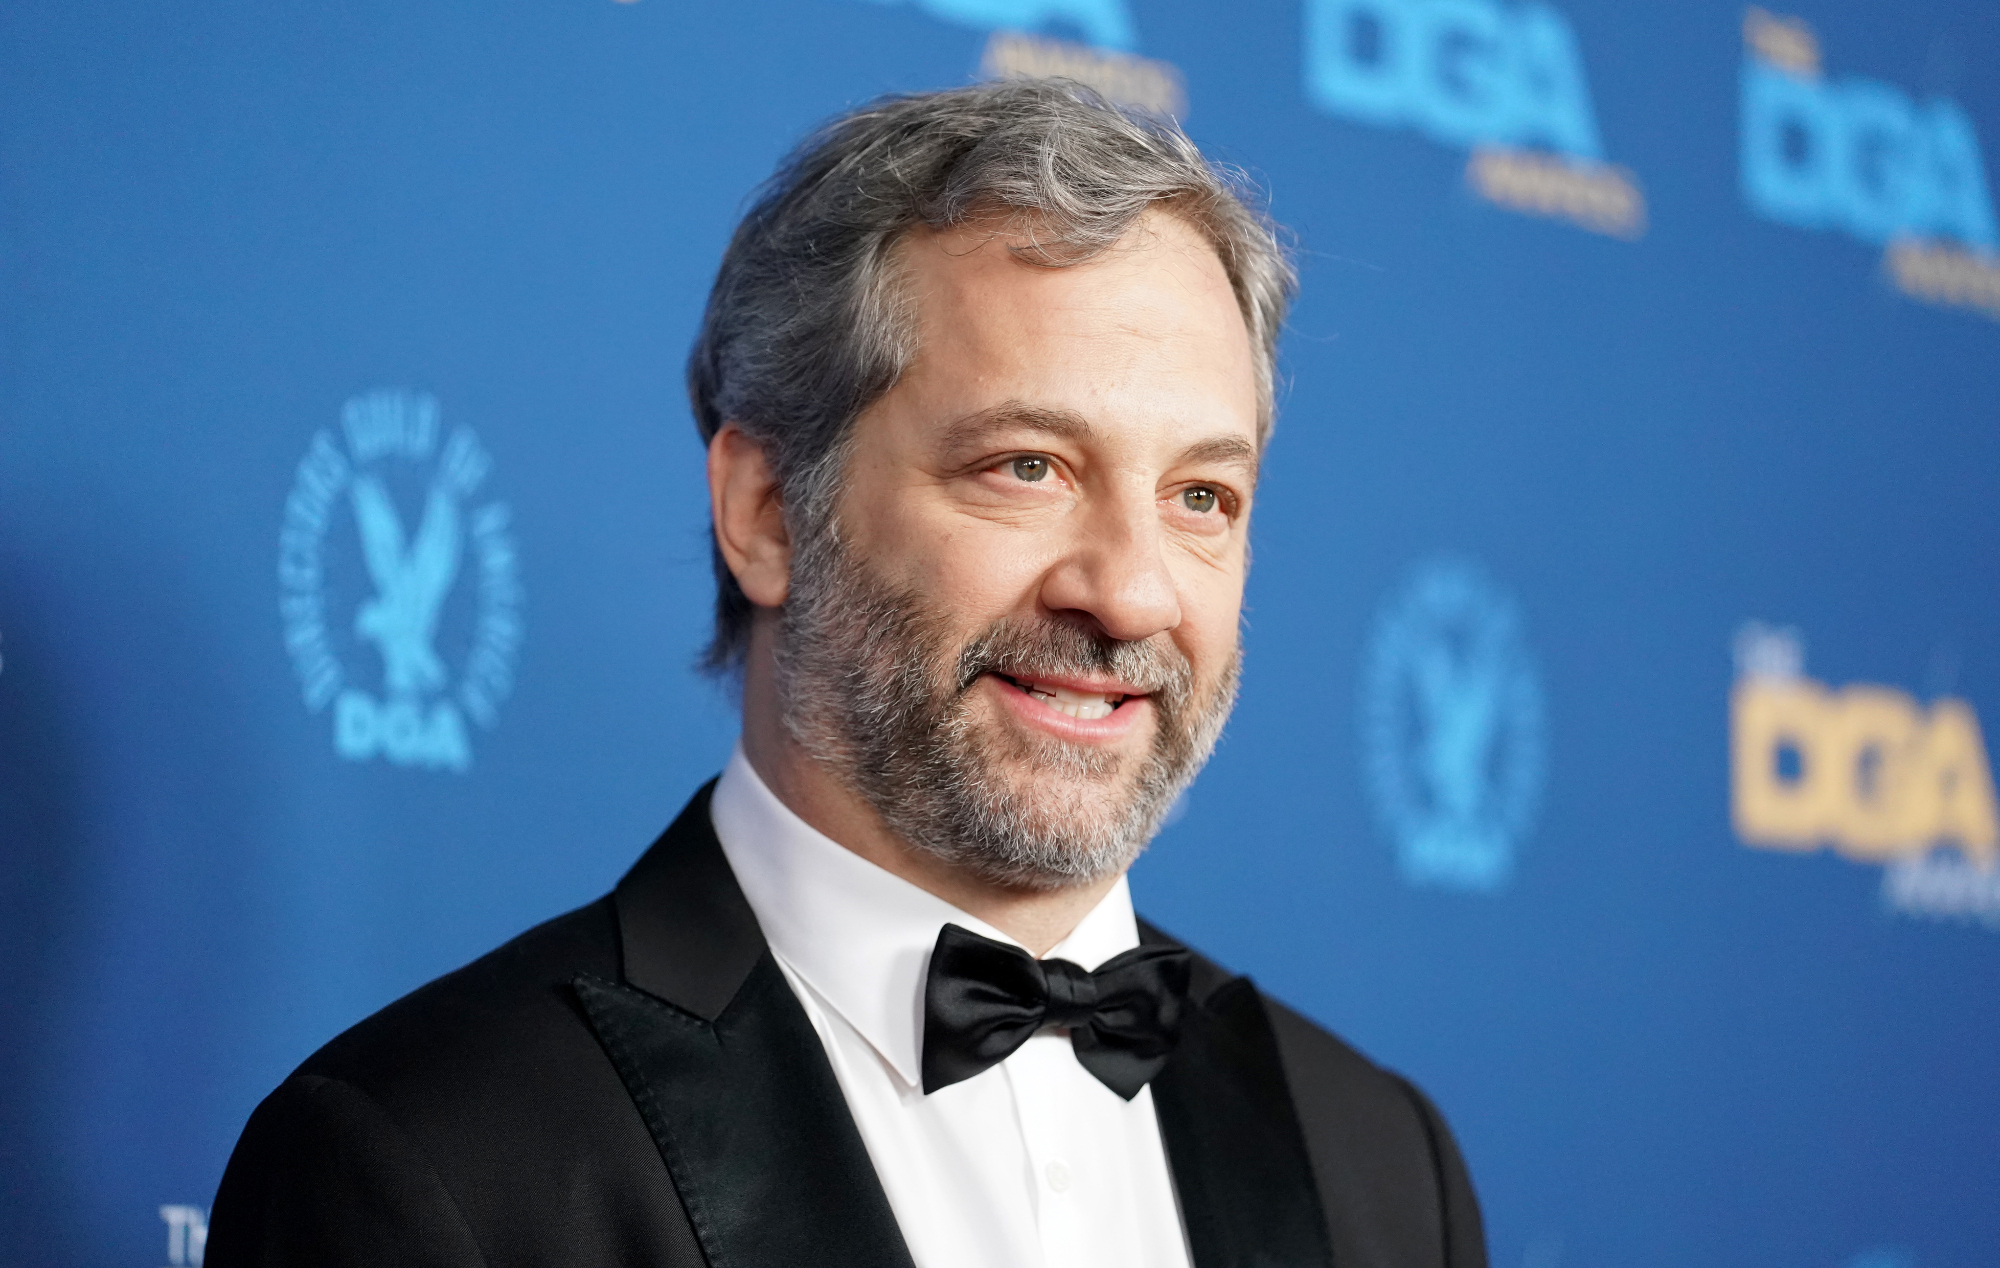 Judd Apatow before Oscars 2022 season in tux in front of blue step and repeat